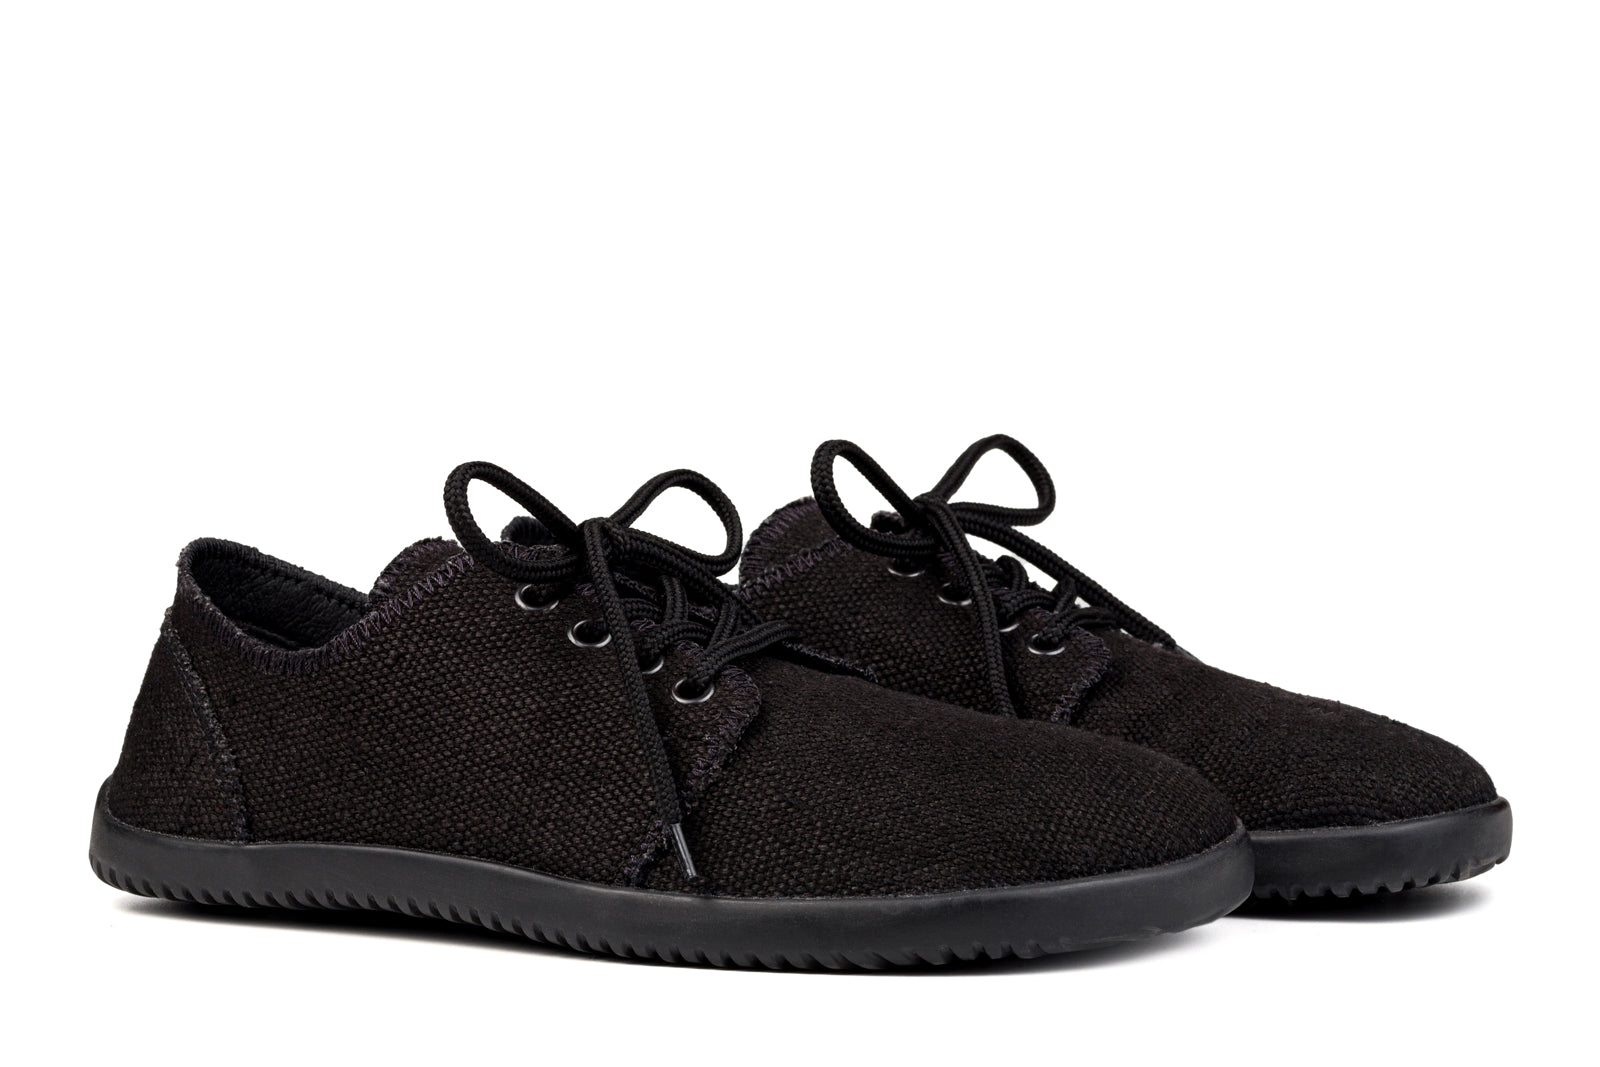 Men's black hemp sneakers by physiotherapists [Free Exchange]